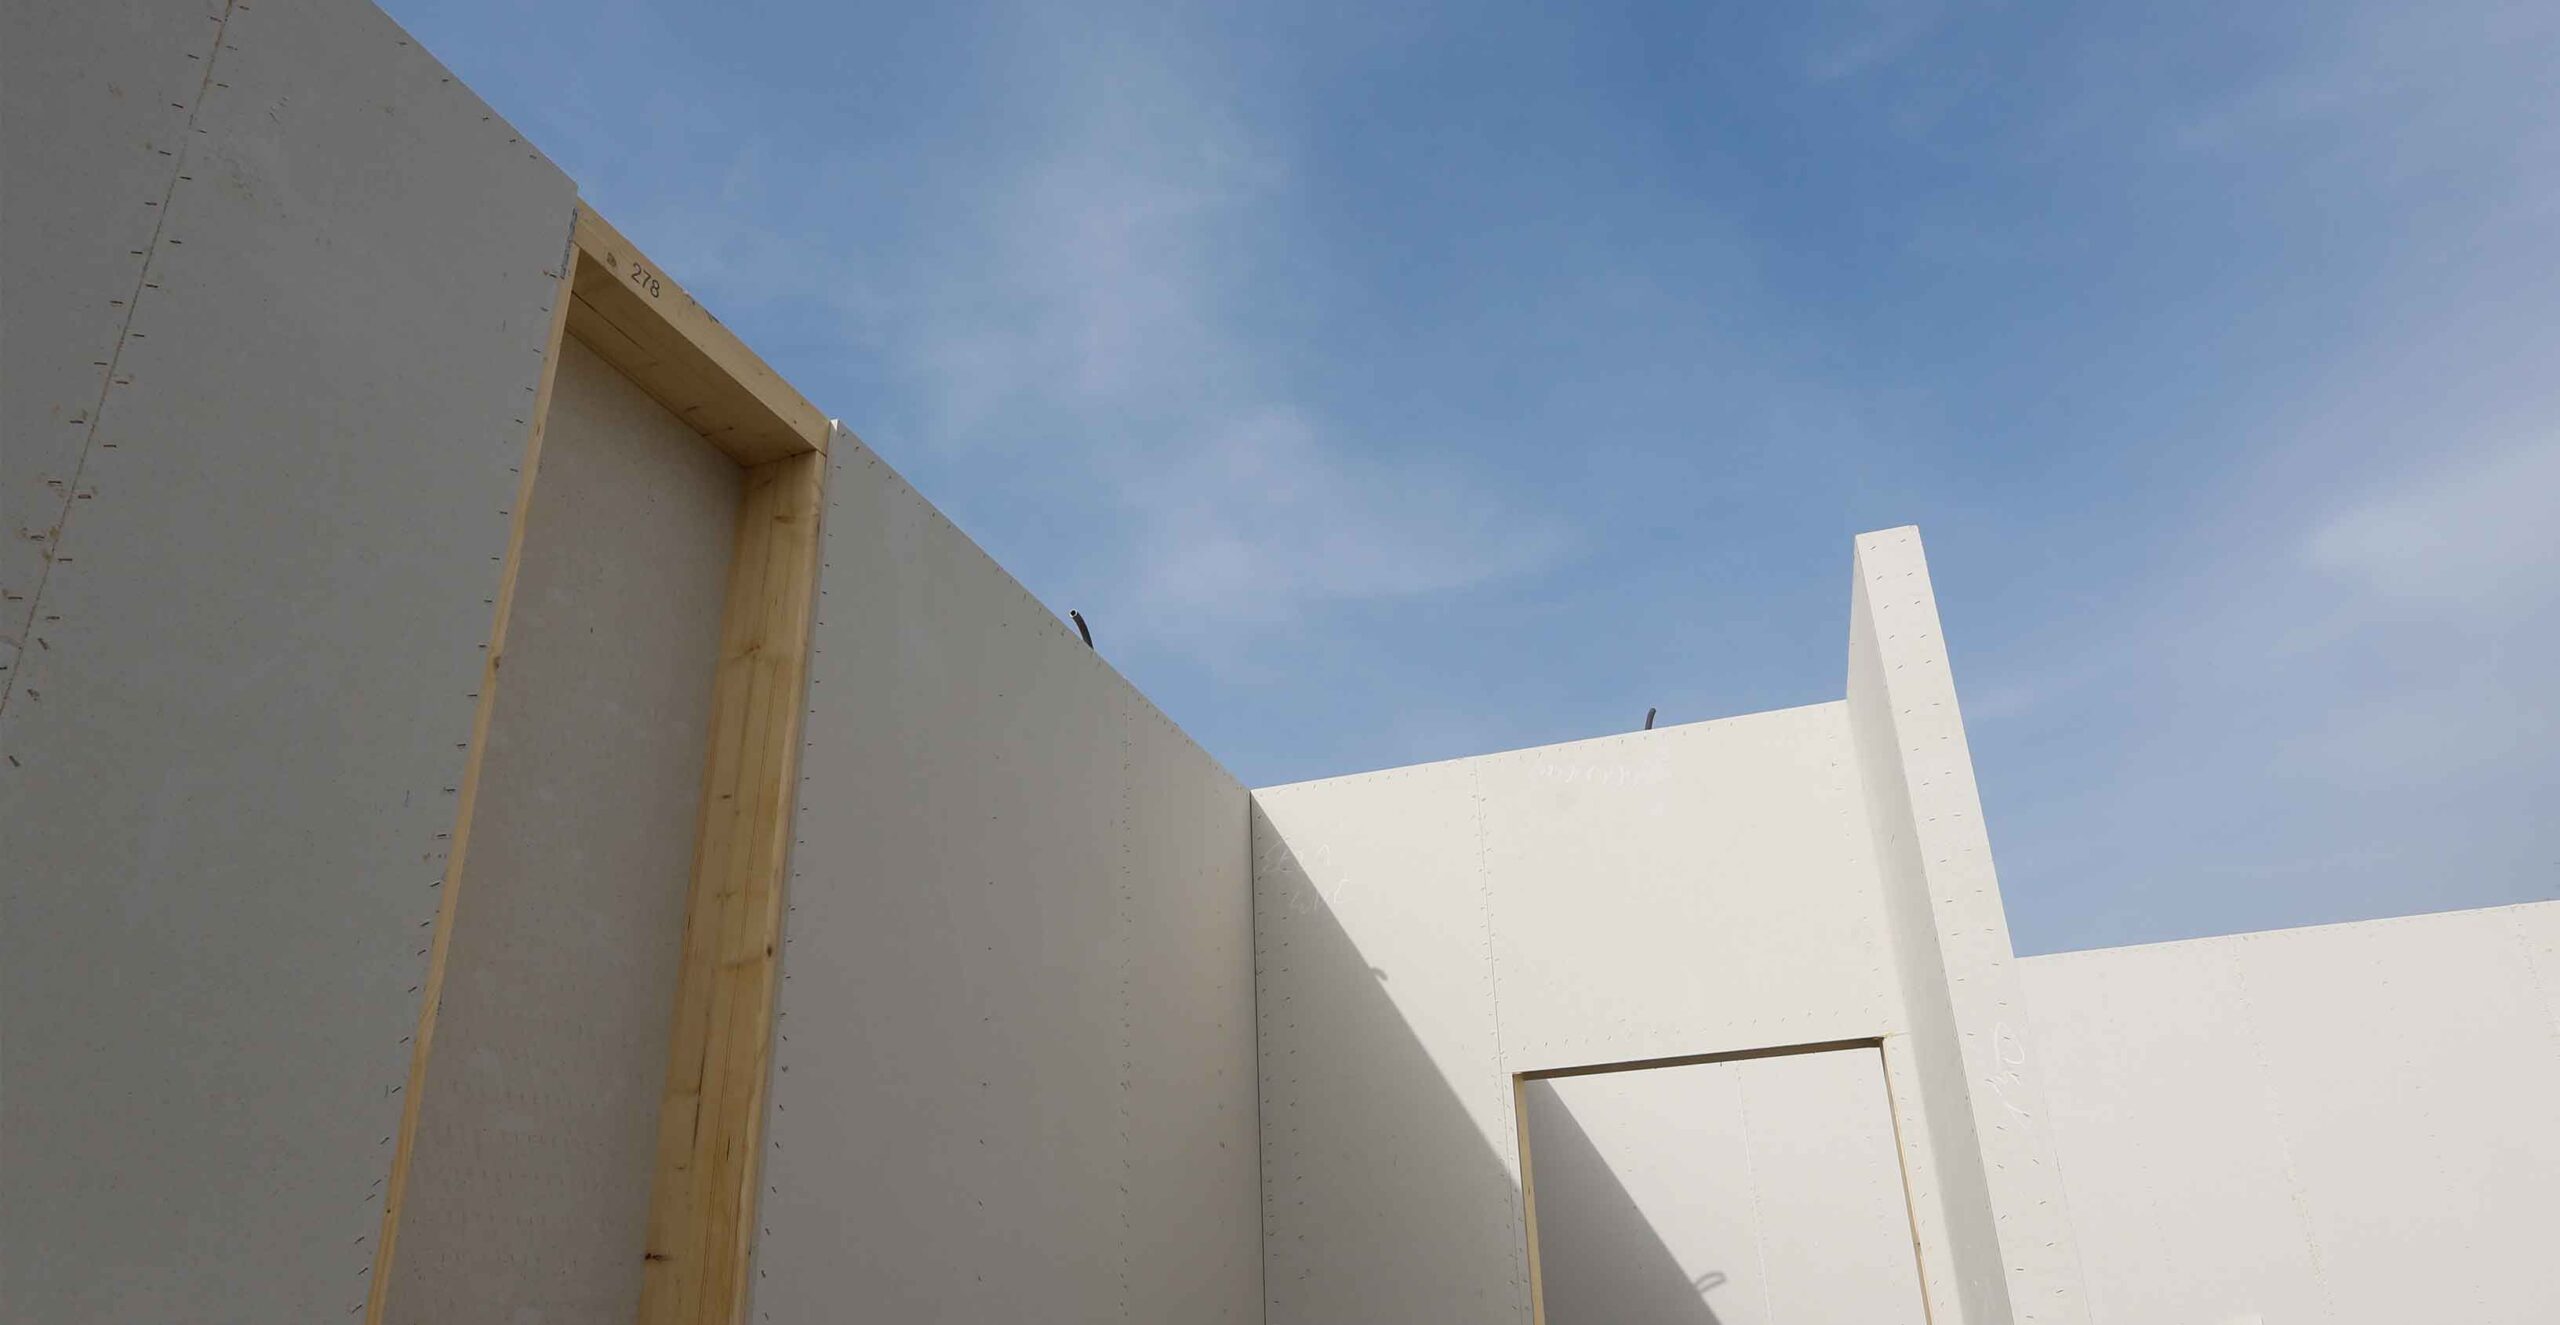 Modular Construction: What’s it Made Of?